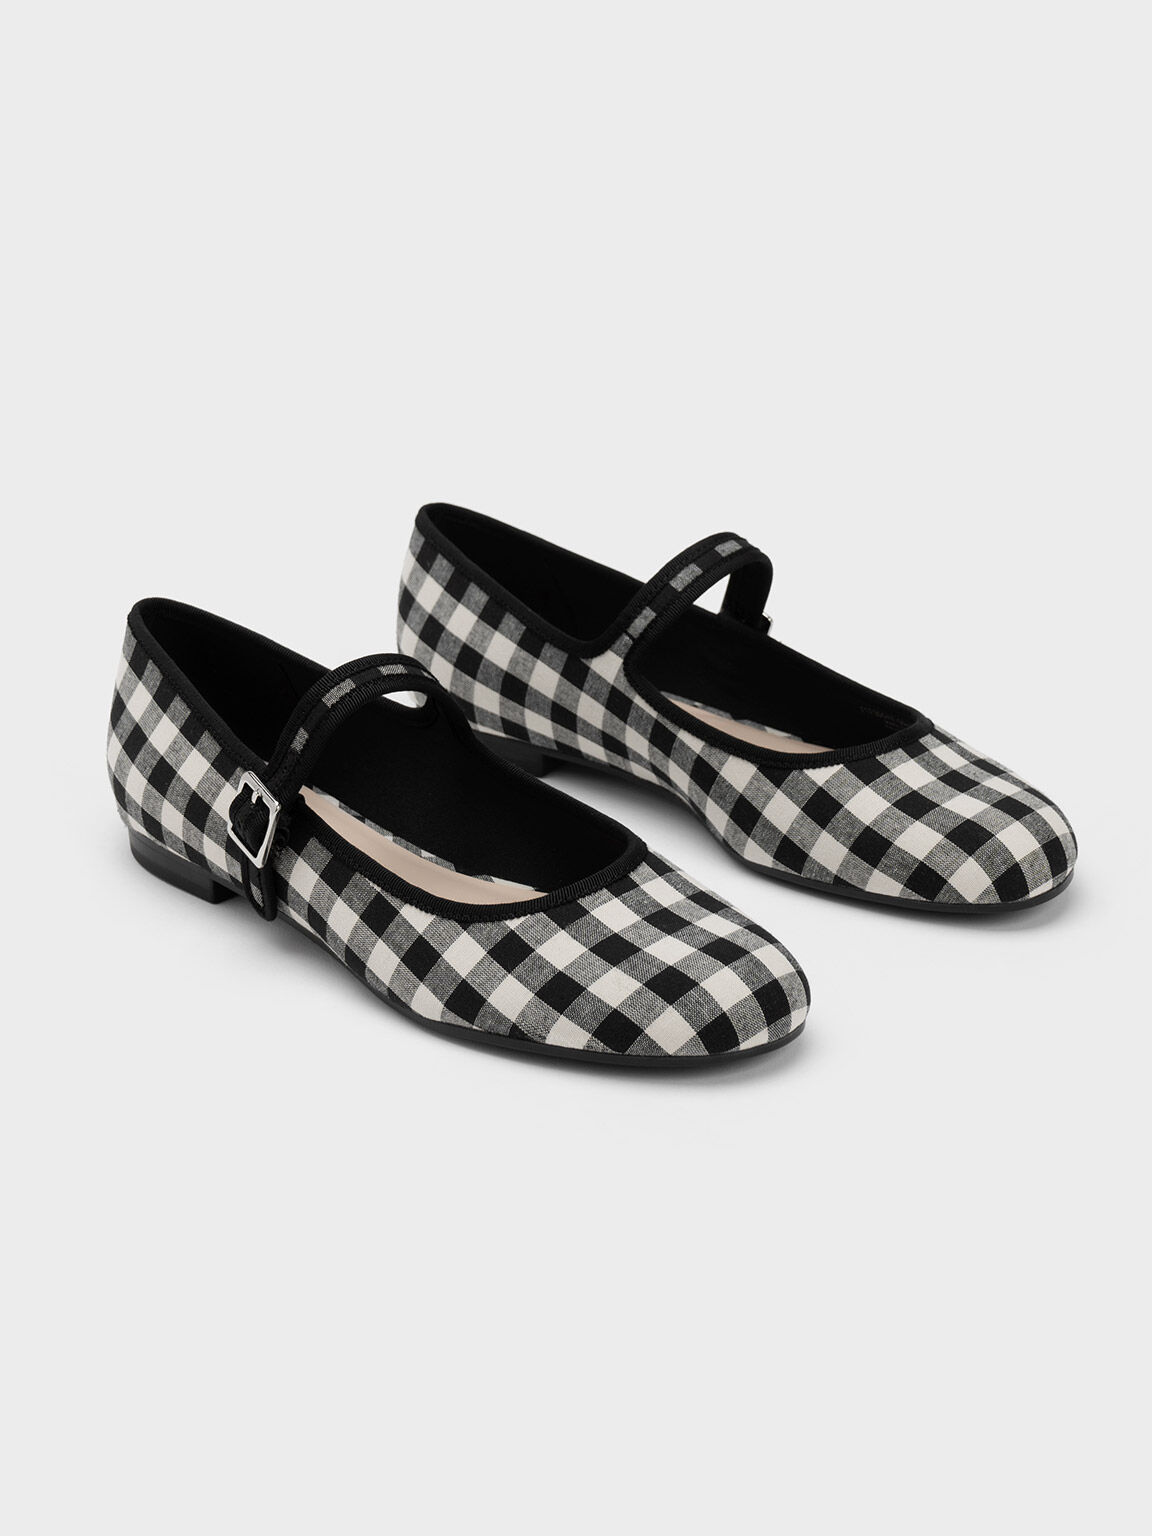 Black Textured Checkered Buckled Mary Jane Flats - CHARLES & KEITH AU